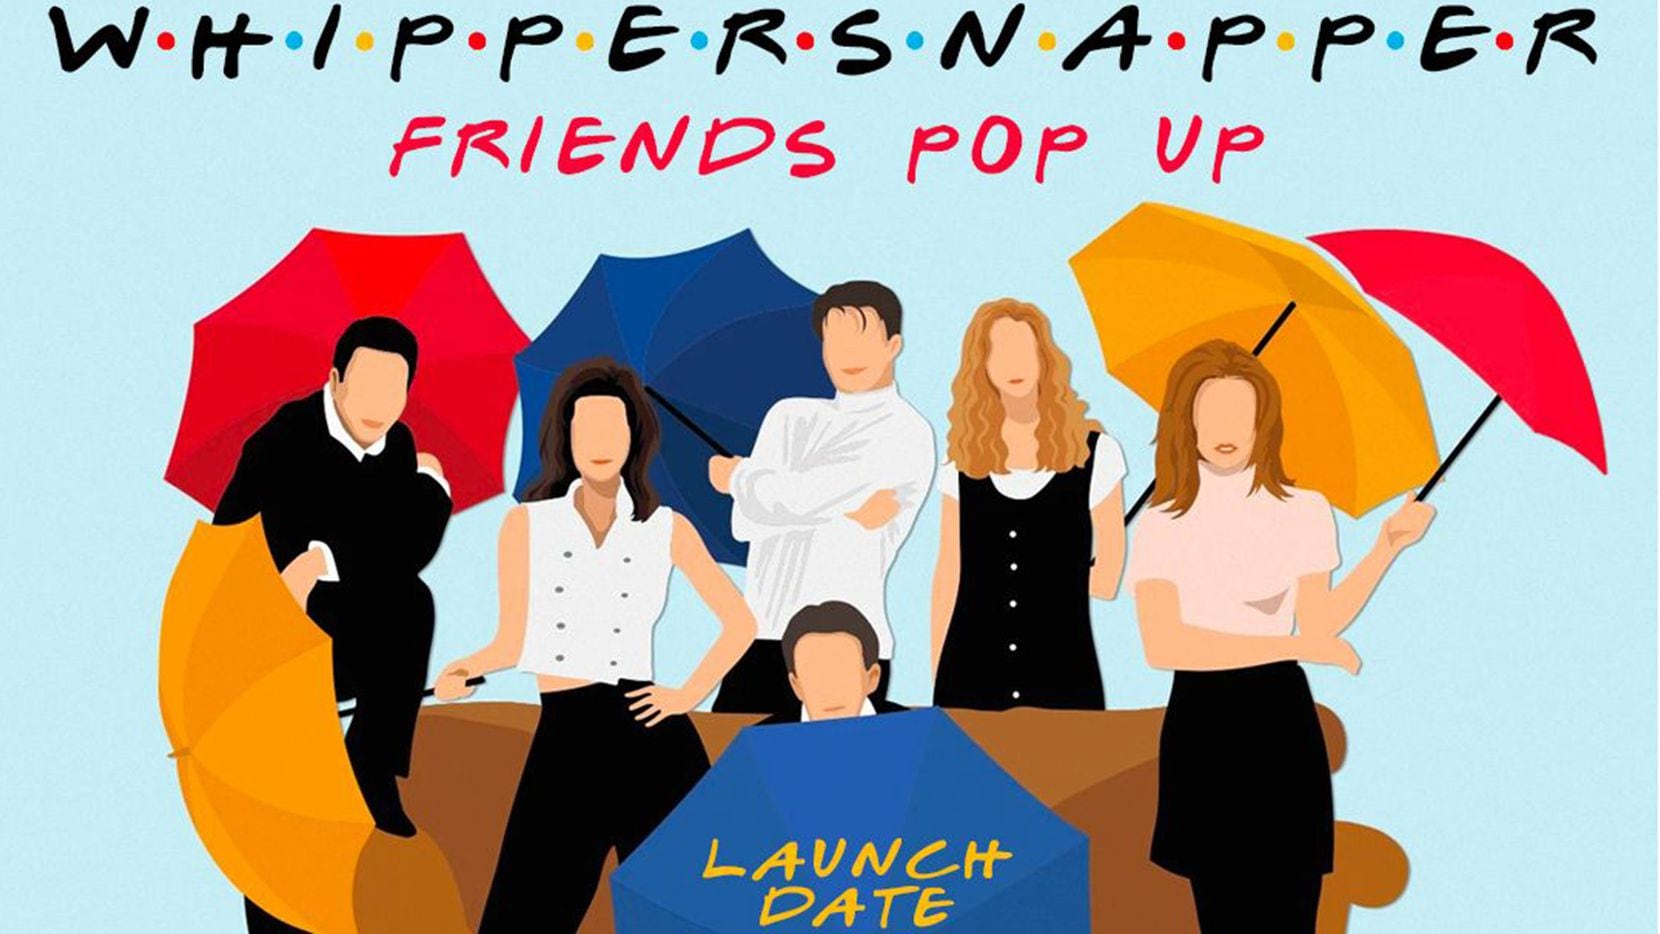 The Whippersnapper, a bar near Henderson Avenue in Dallas, will get a limited-time-only makeover starting Jan. 20, 2022. All food, drink and decor will be redesigned in honor of the TV show 'Friends.'